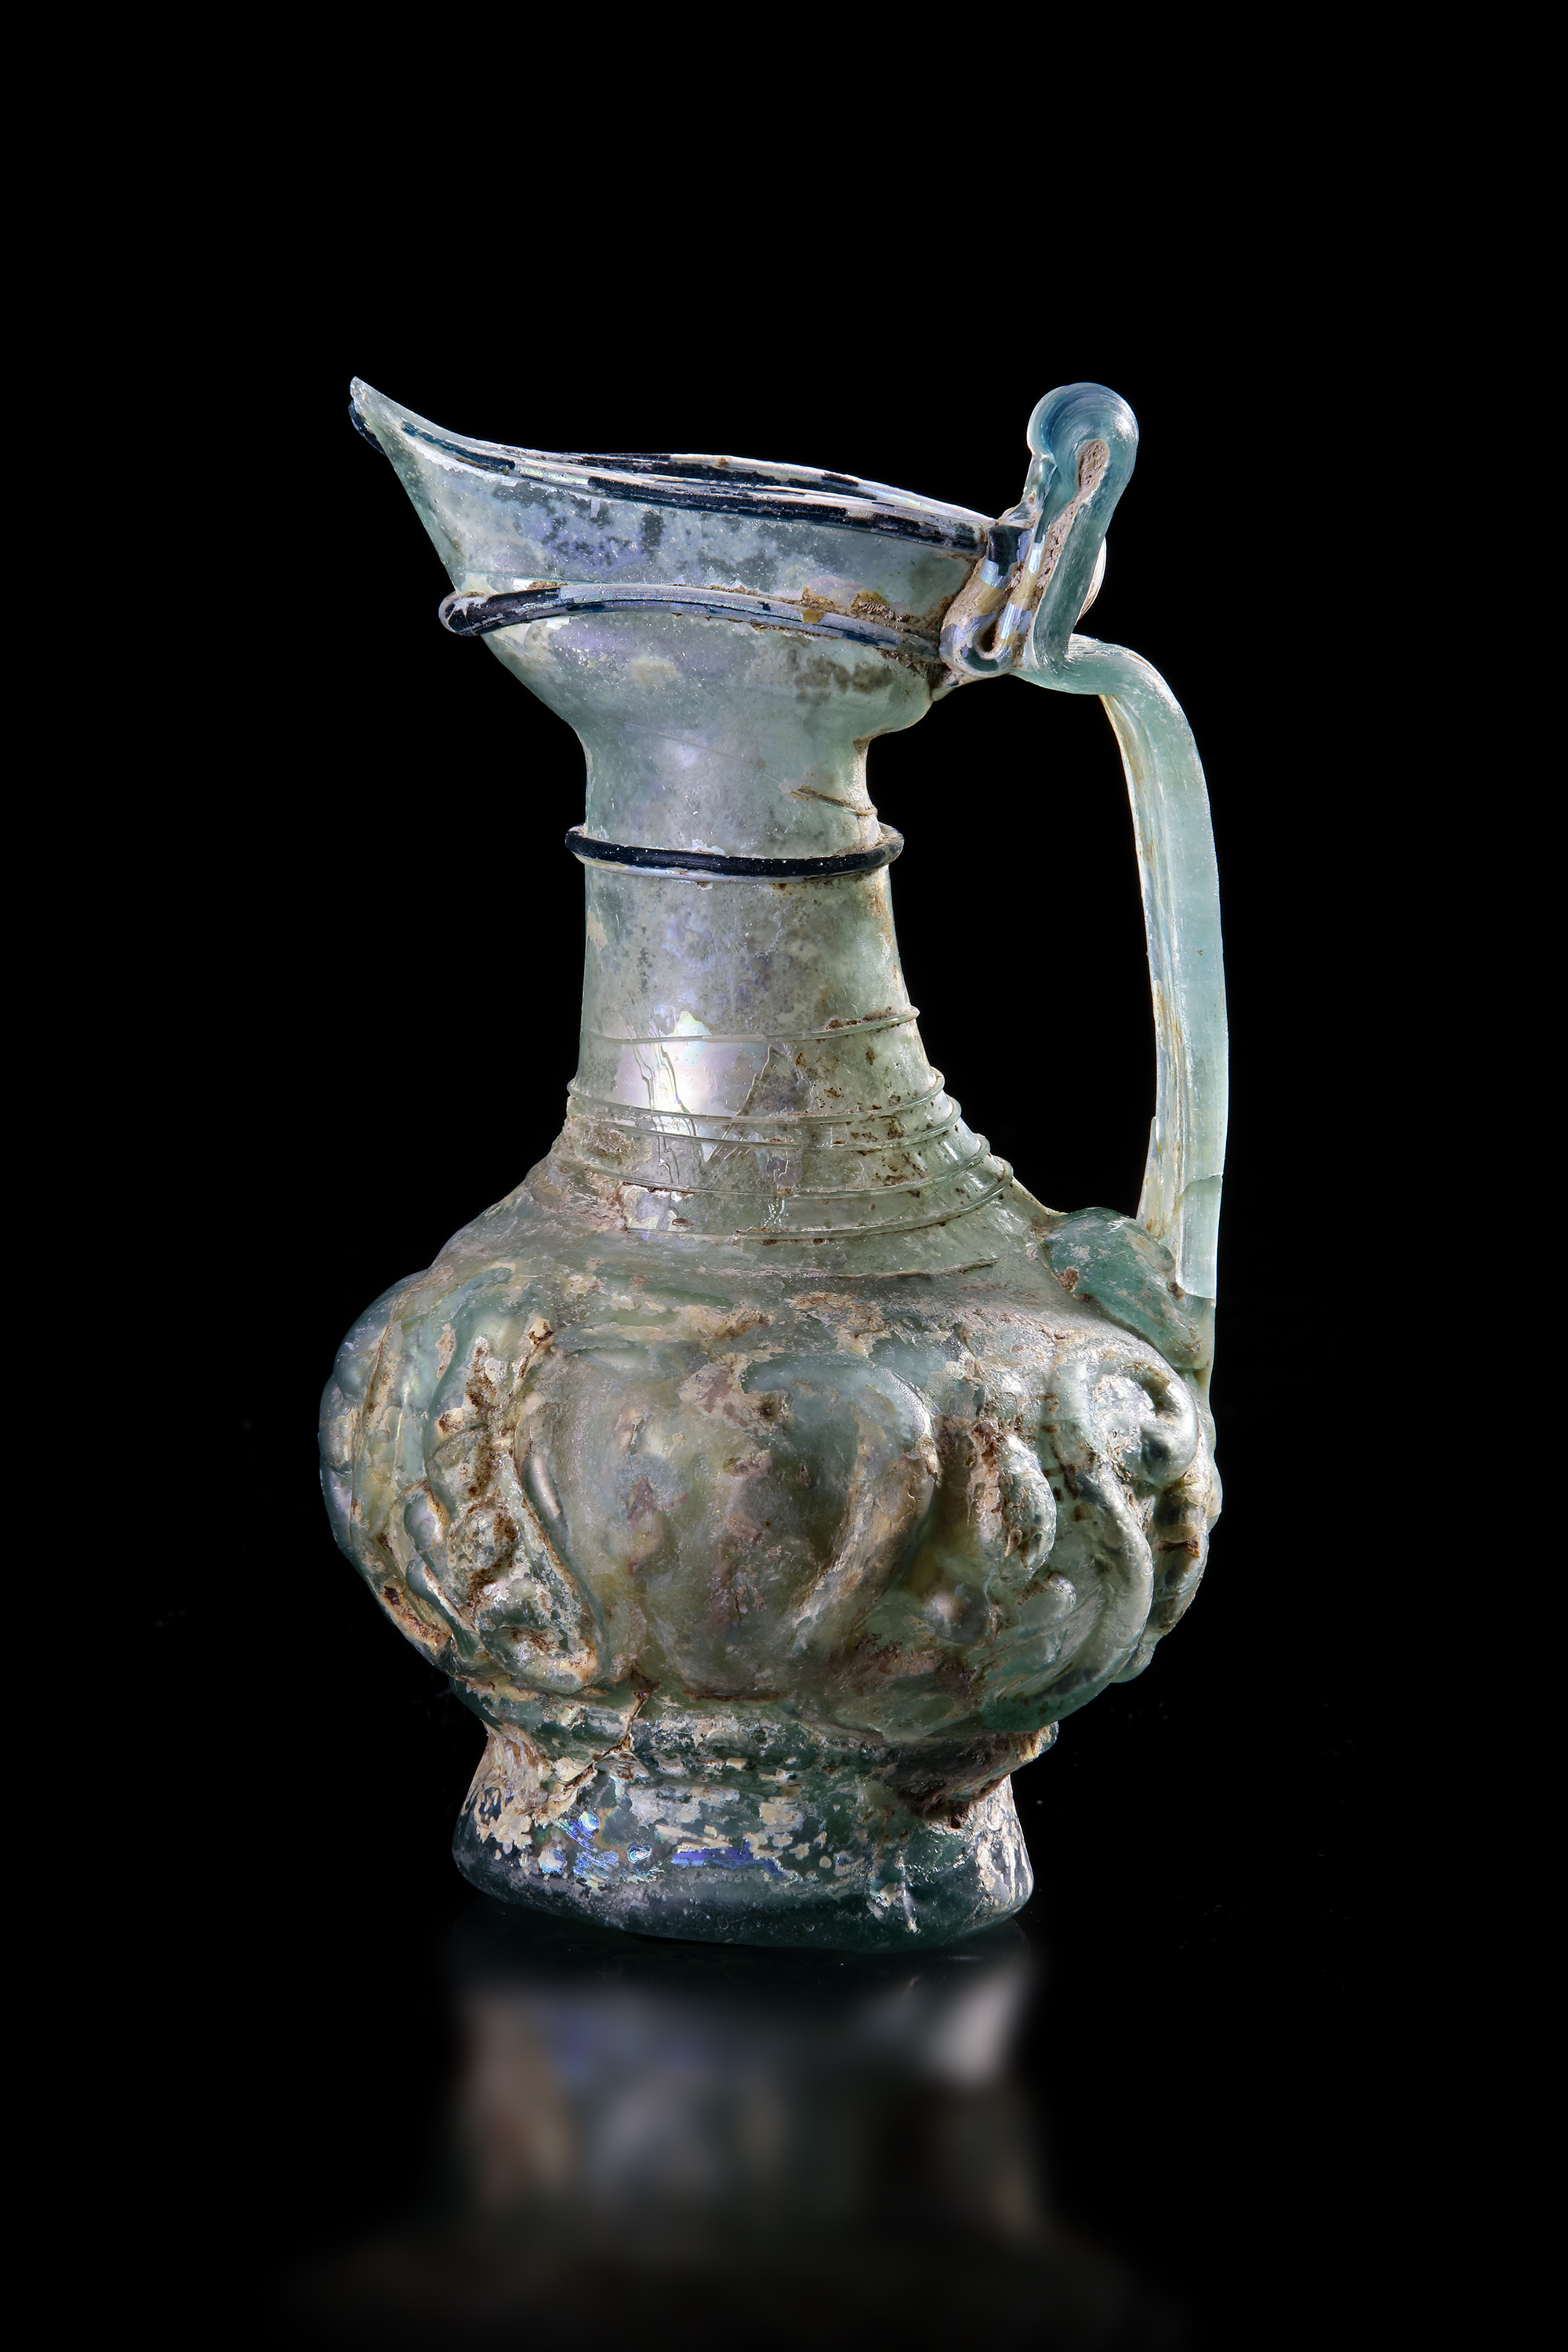 A GLASS EWER WITH SPOUT, PERSIA, 10TH-12TH CENTURY - Image 12 of 12